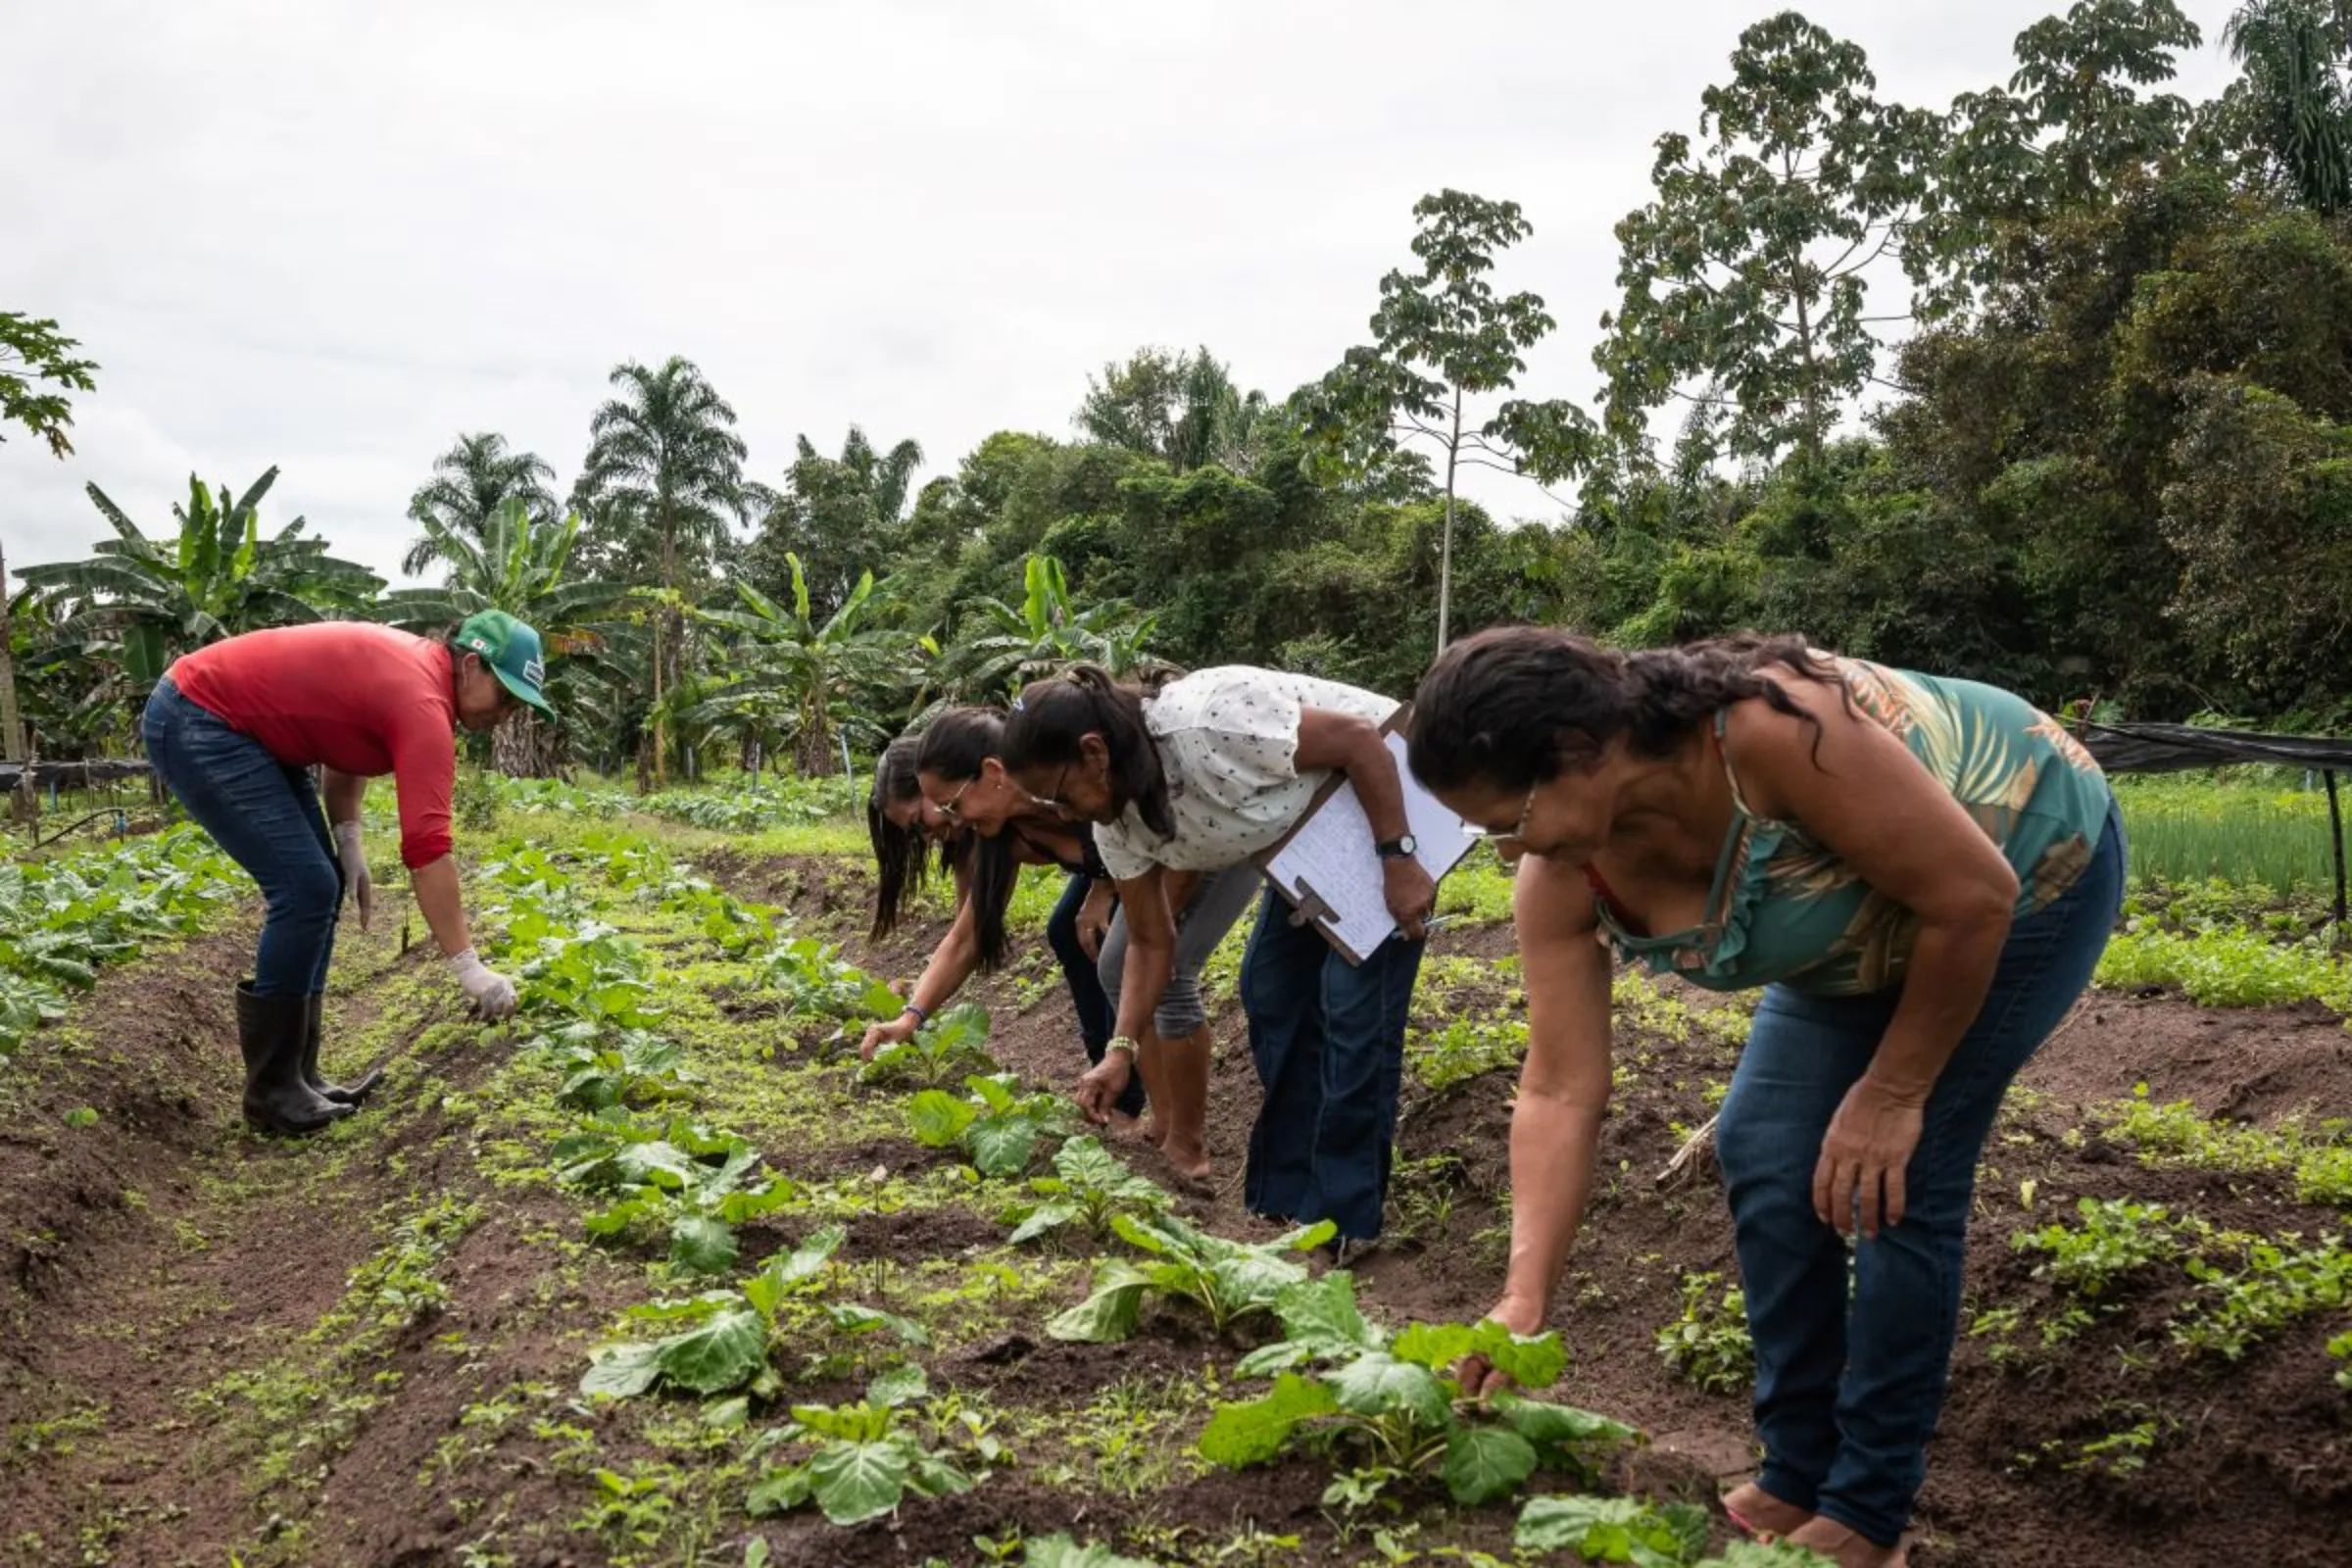 Members of the Aprocamp co-operative pick herbs at their garden in Pará, Brazil, January 18, 2023. Thomson Reuters Foundation/Cícero Pedrosa Neto